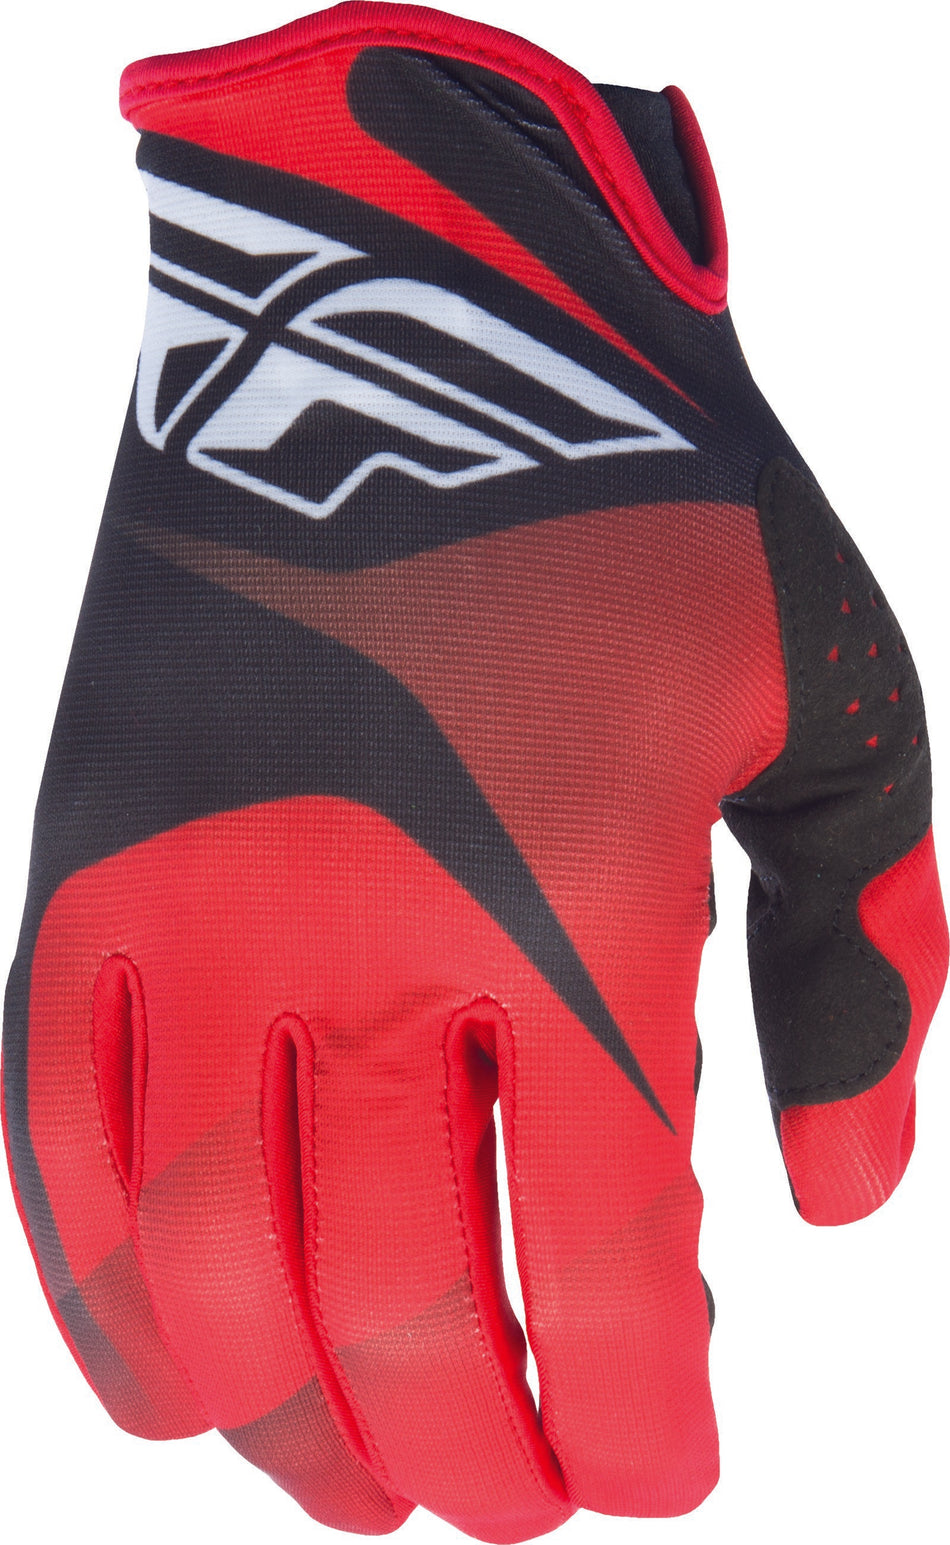 FLY RACING Lite Glove Red/Black/White Sz 8 S 370-01208